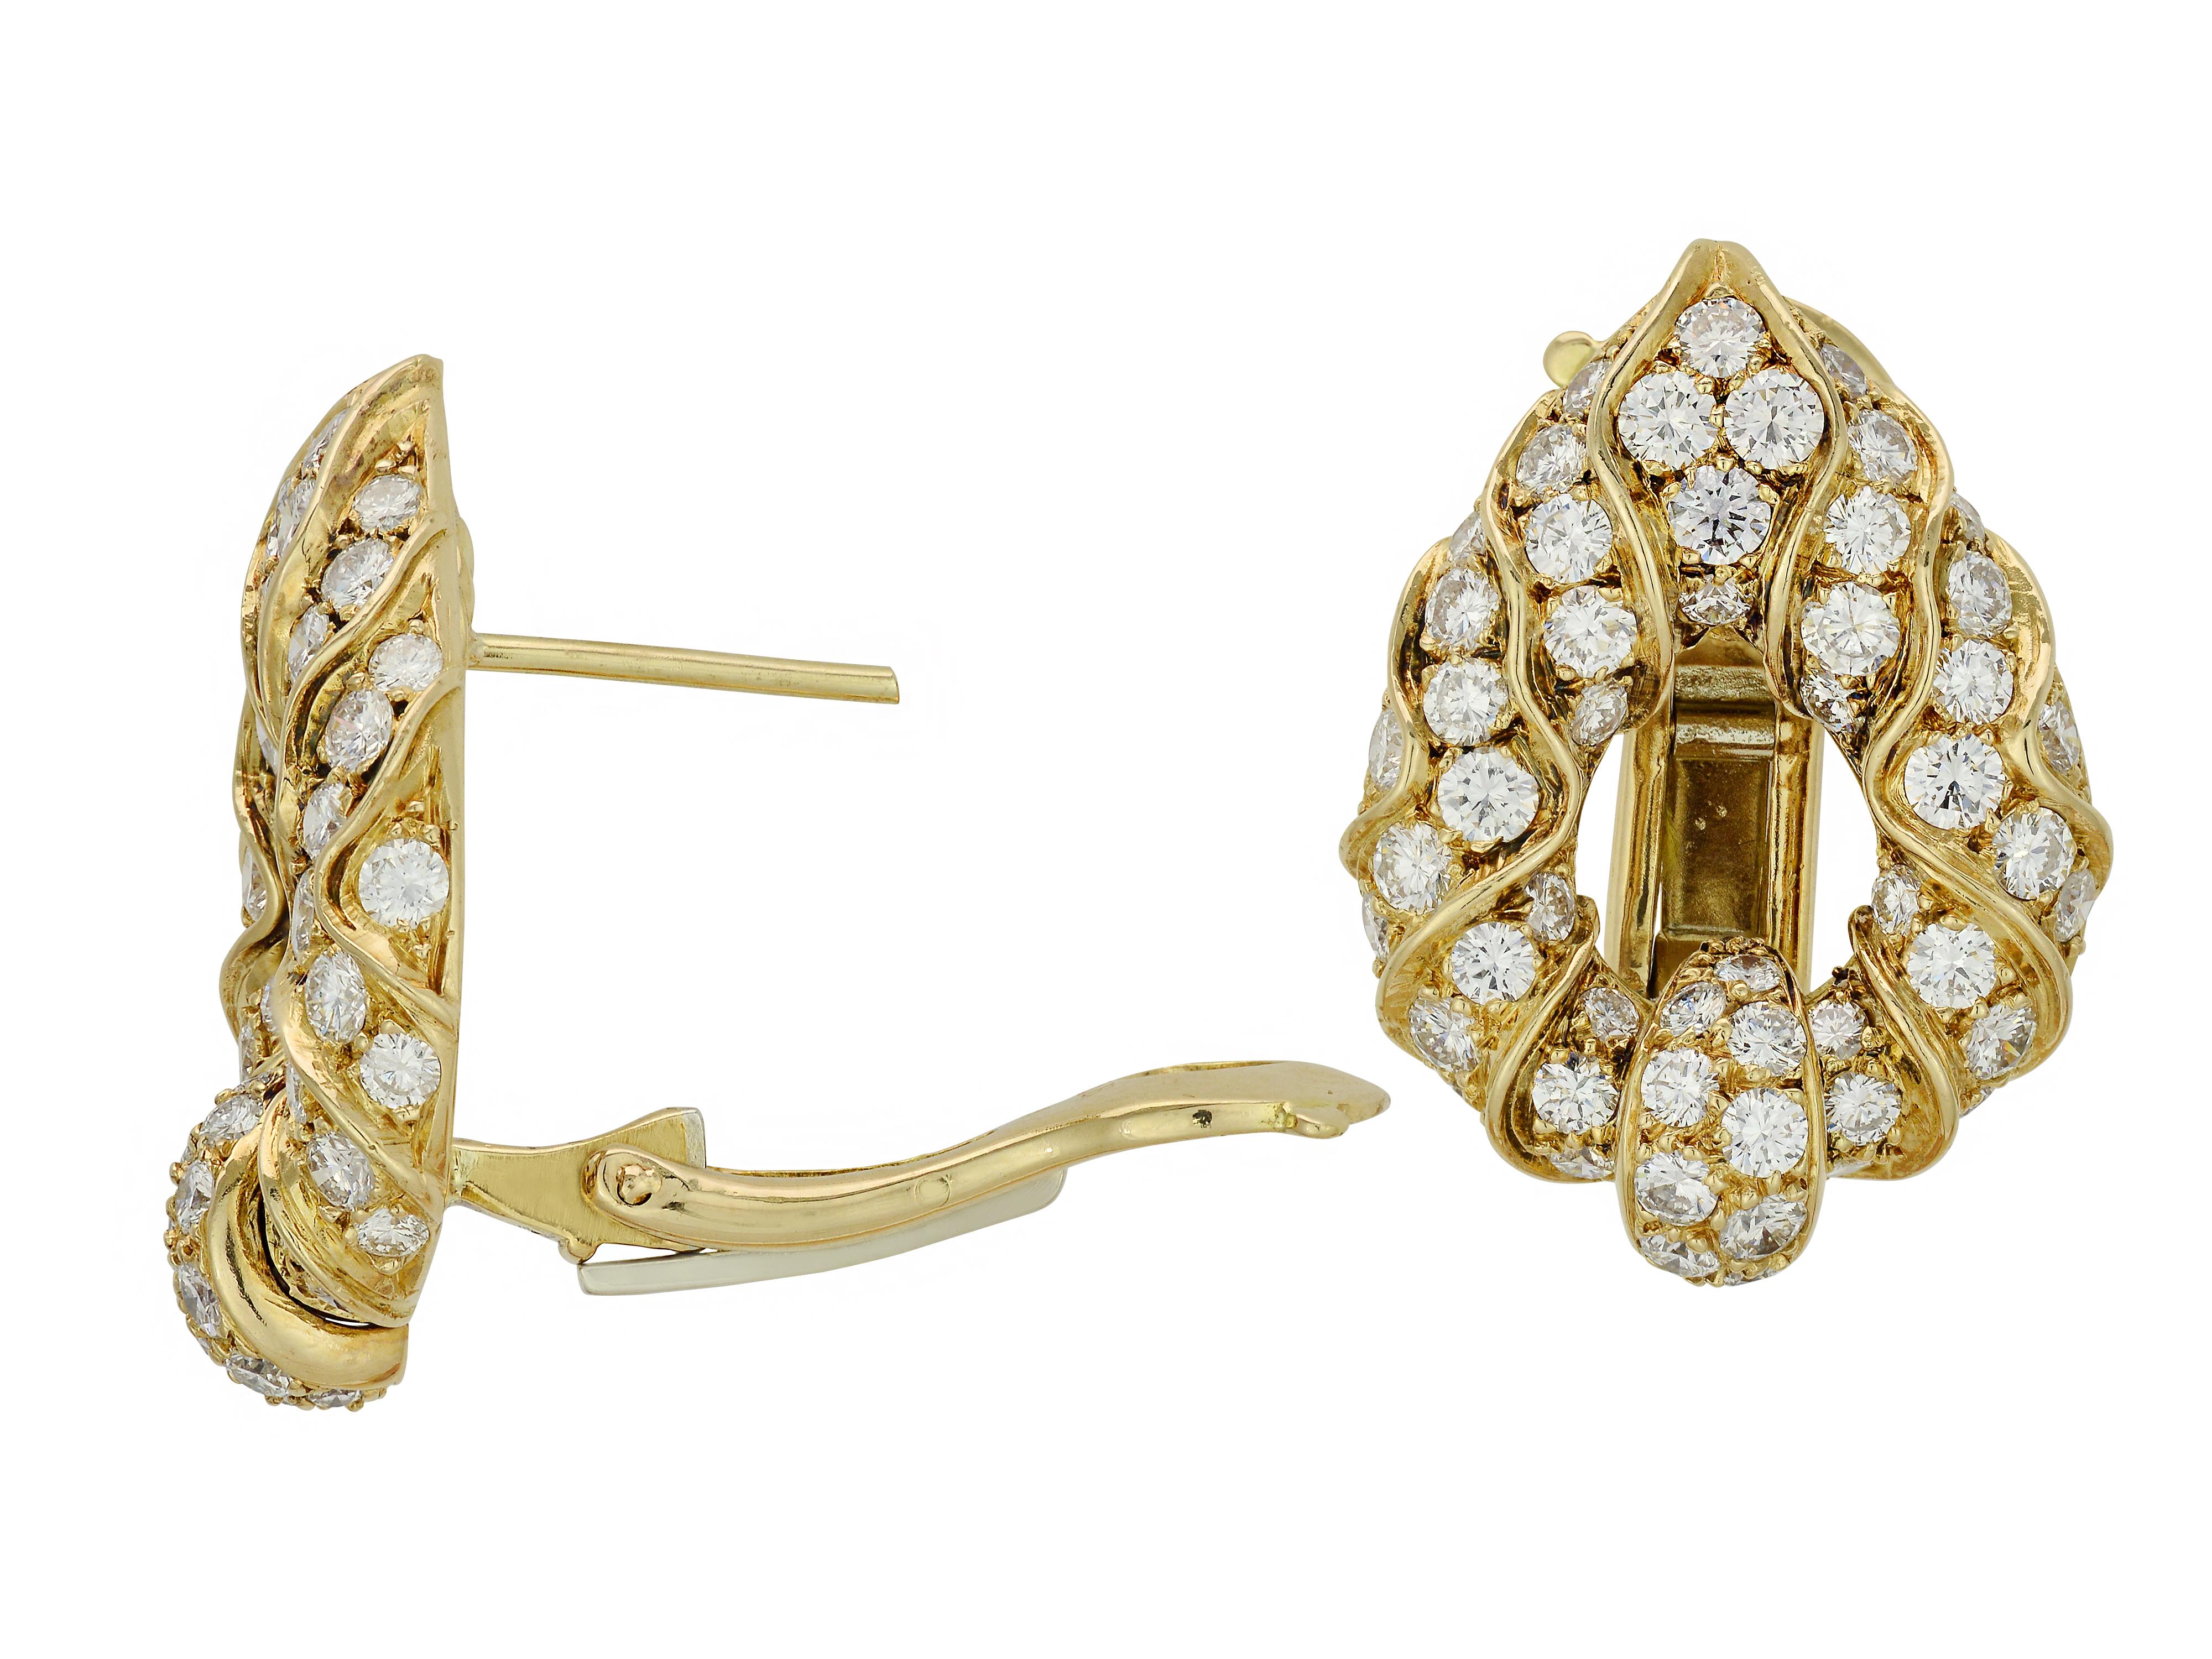 18 Karat Yellow Gold Earrings From Designer Marina B. The Earrings Feature 106 Round Diamonds Totaling Approximately 5.00 Carats of VS Clarity & G Color. Pierced Post with Supportive Clip Back. MSRP $20,000.00